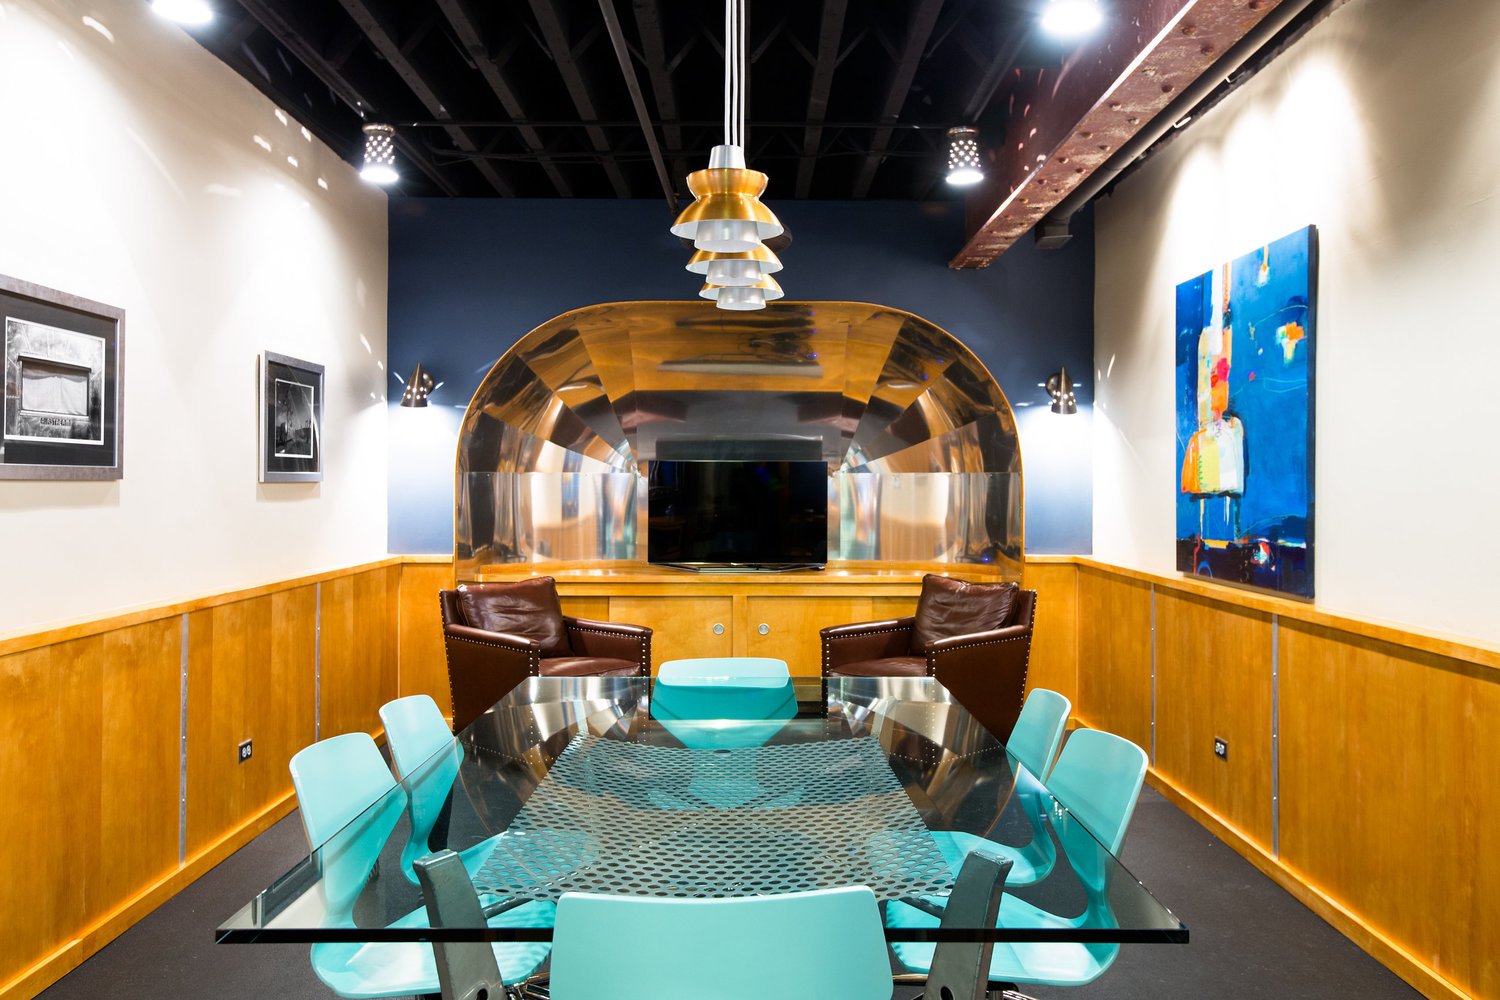 Authentic shellacked plywood and airplane grade aluminum were used to set the stage in this airstream inspired conference room. Design by Two Hands Interiors. 